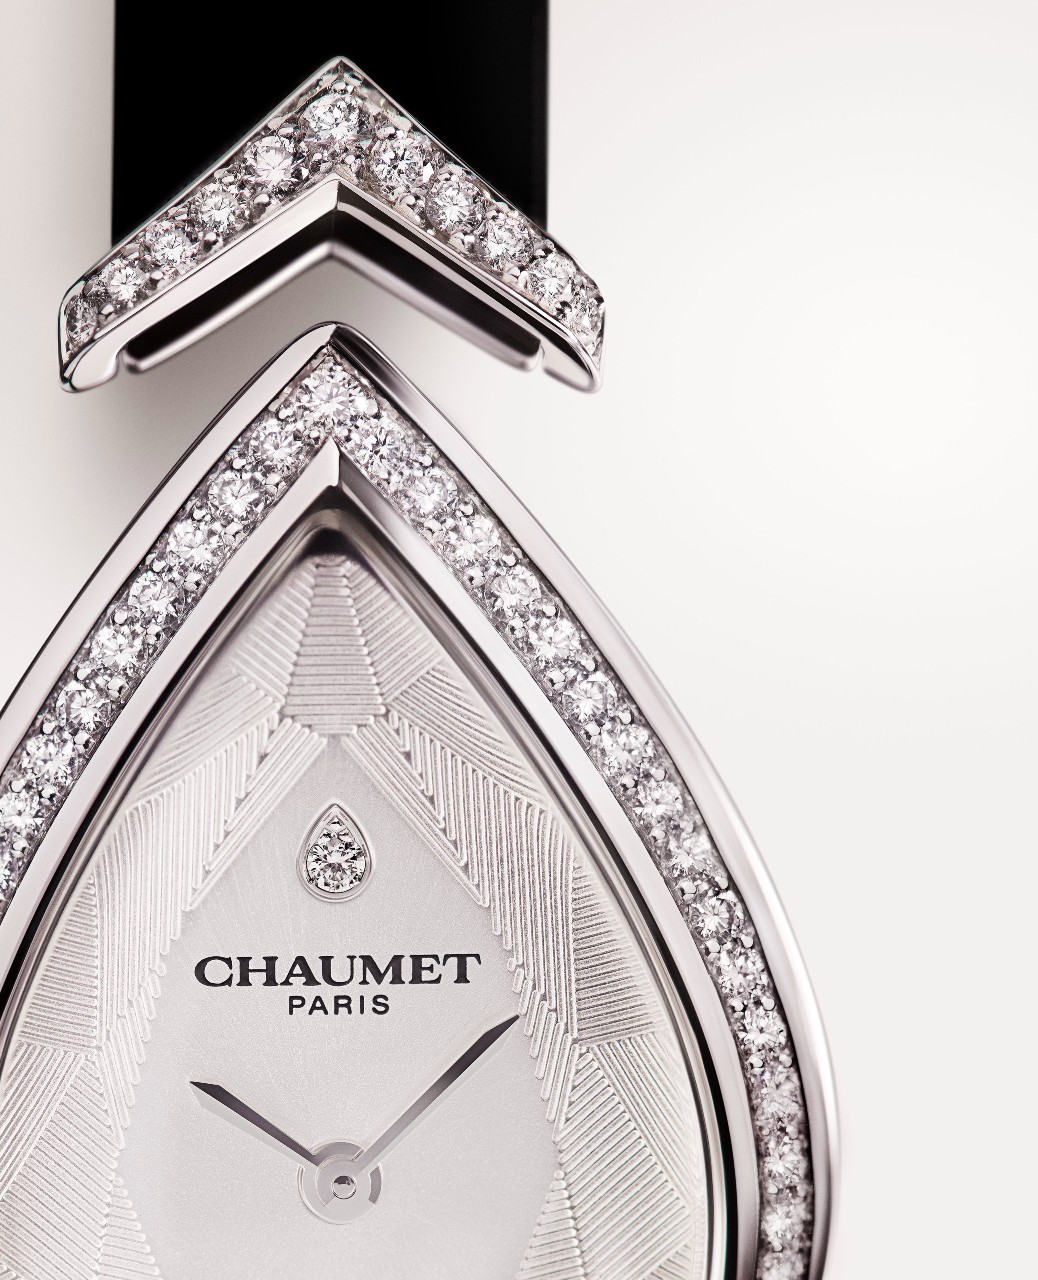 Chaumet's new pearl creations in the Joséphine Aigrette collection